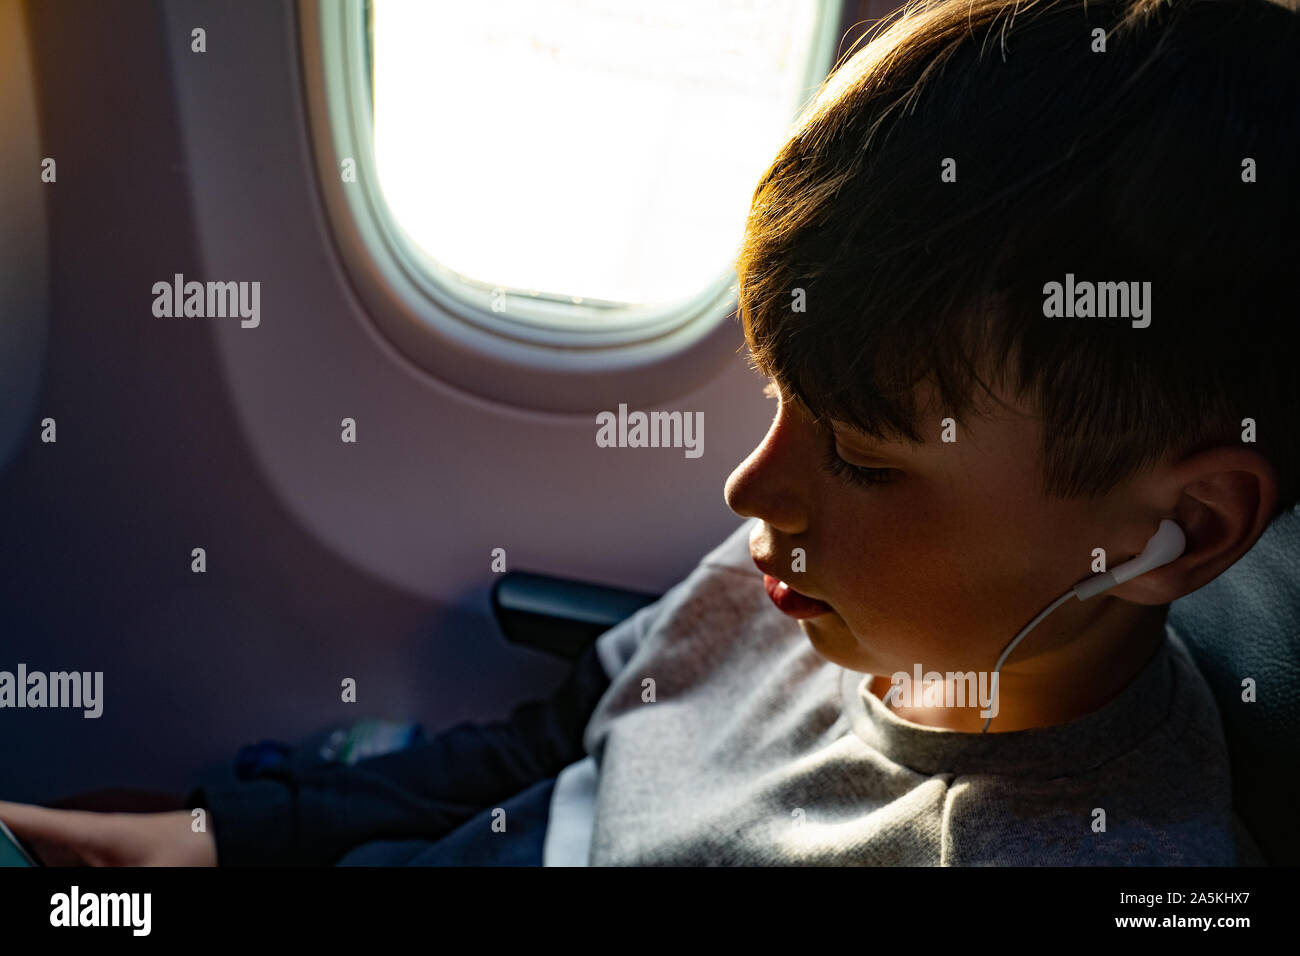 Teenage boy listening to music on earphones during airplane journey, close up Stock Photo